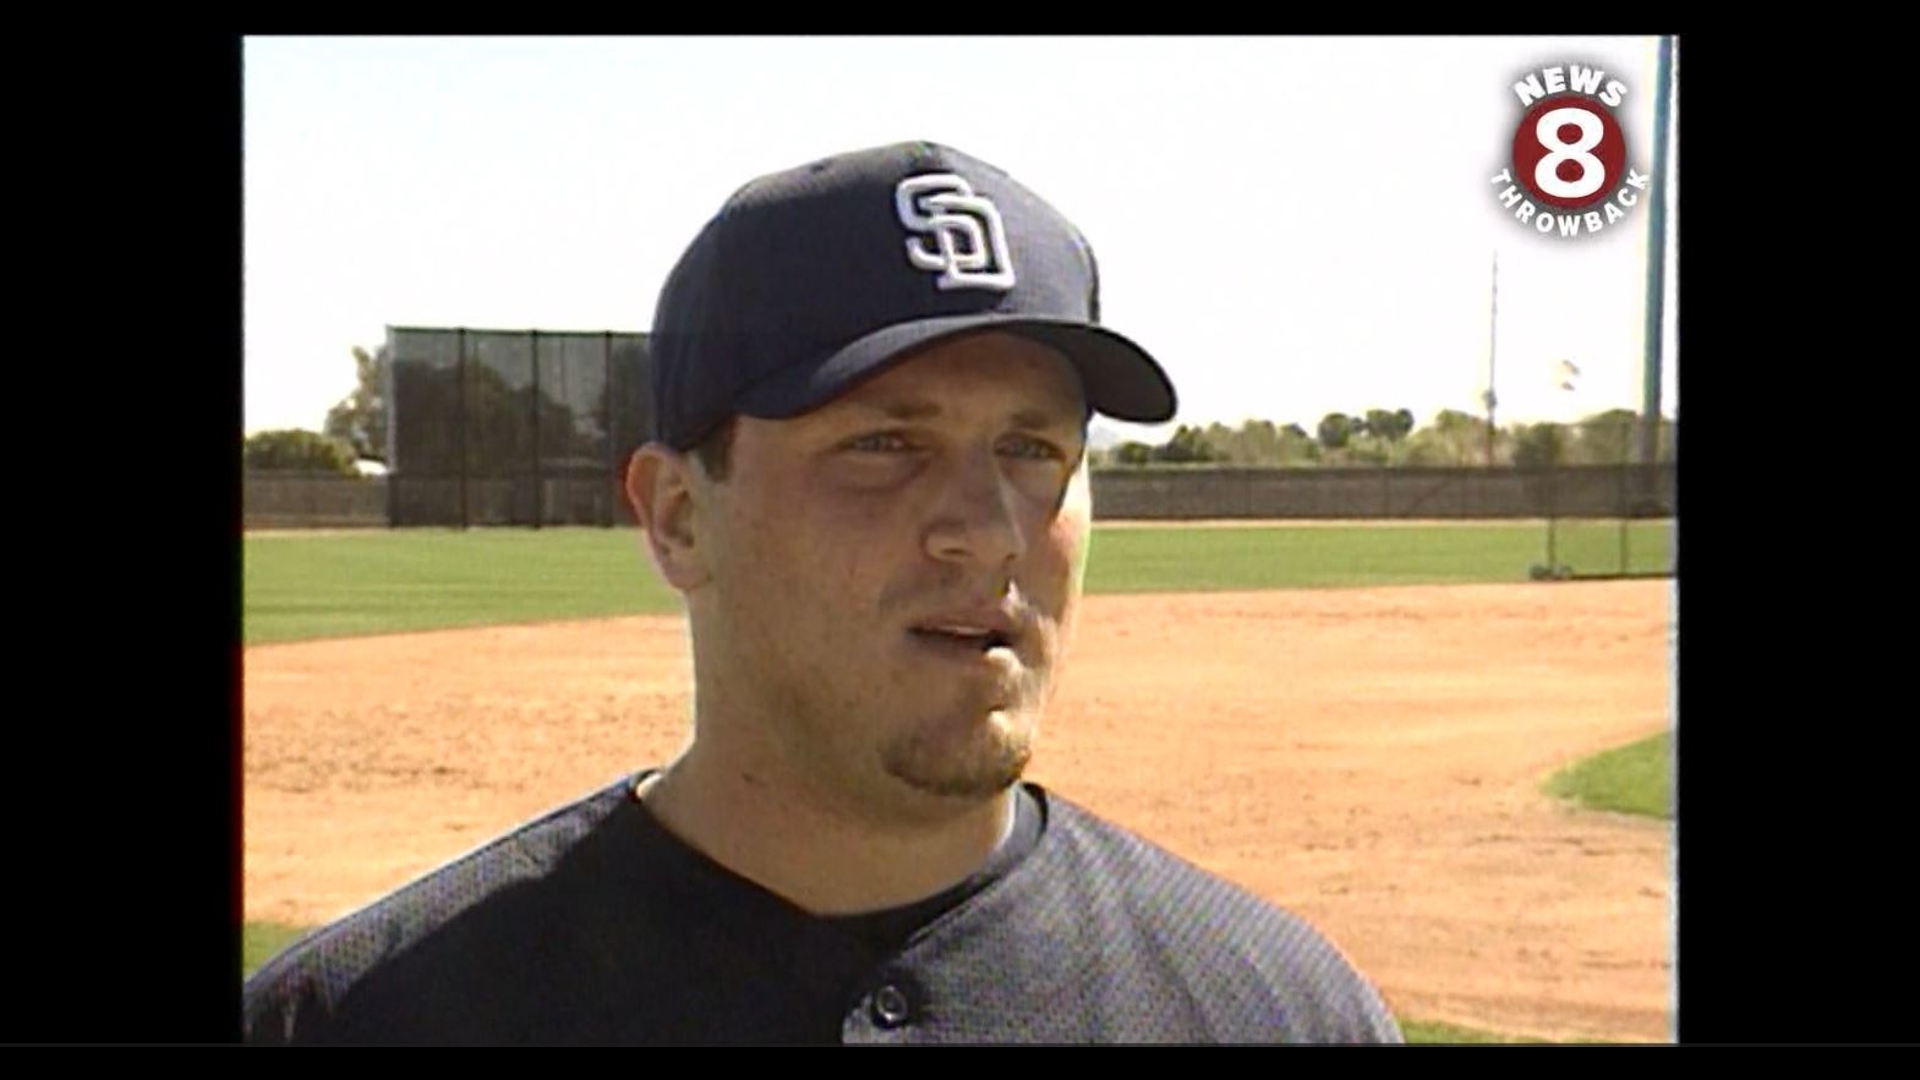 CBS 8 spoke to San Diego Padres player sean Burroughs in this News 8 Throwback from 2002.